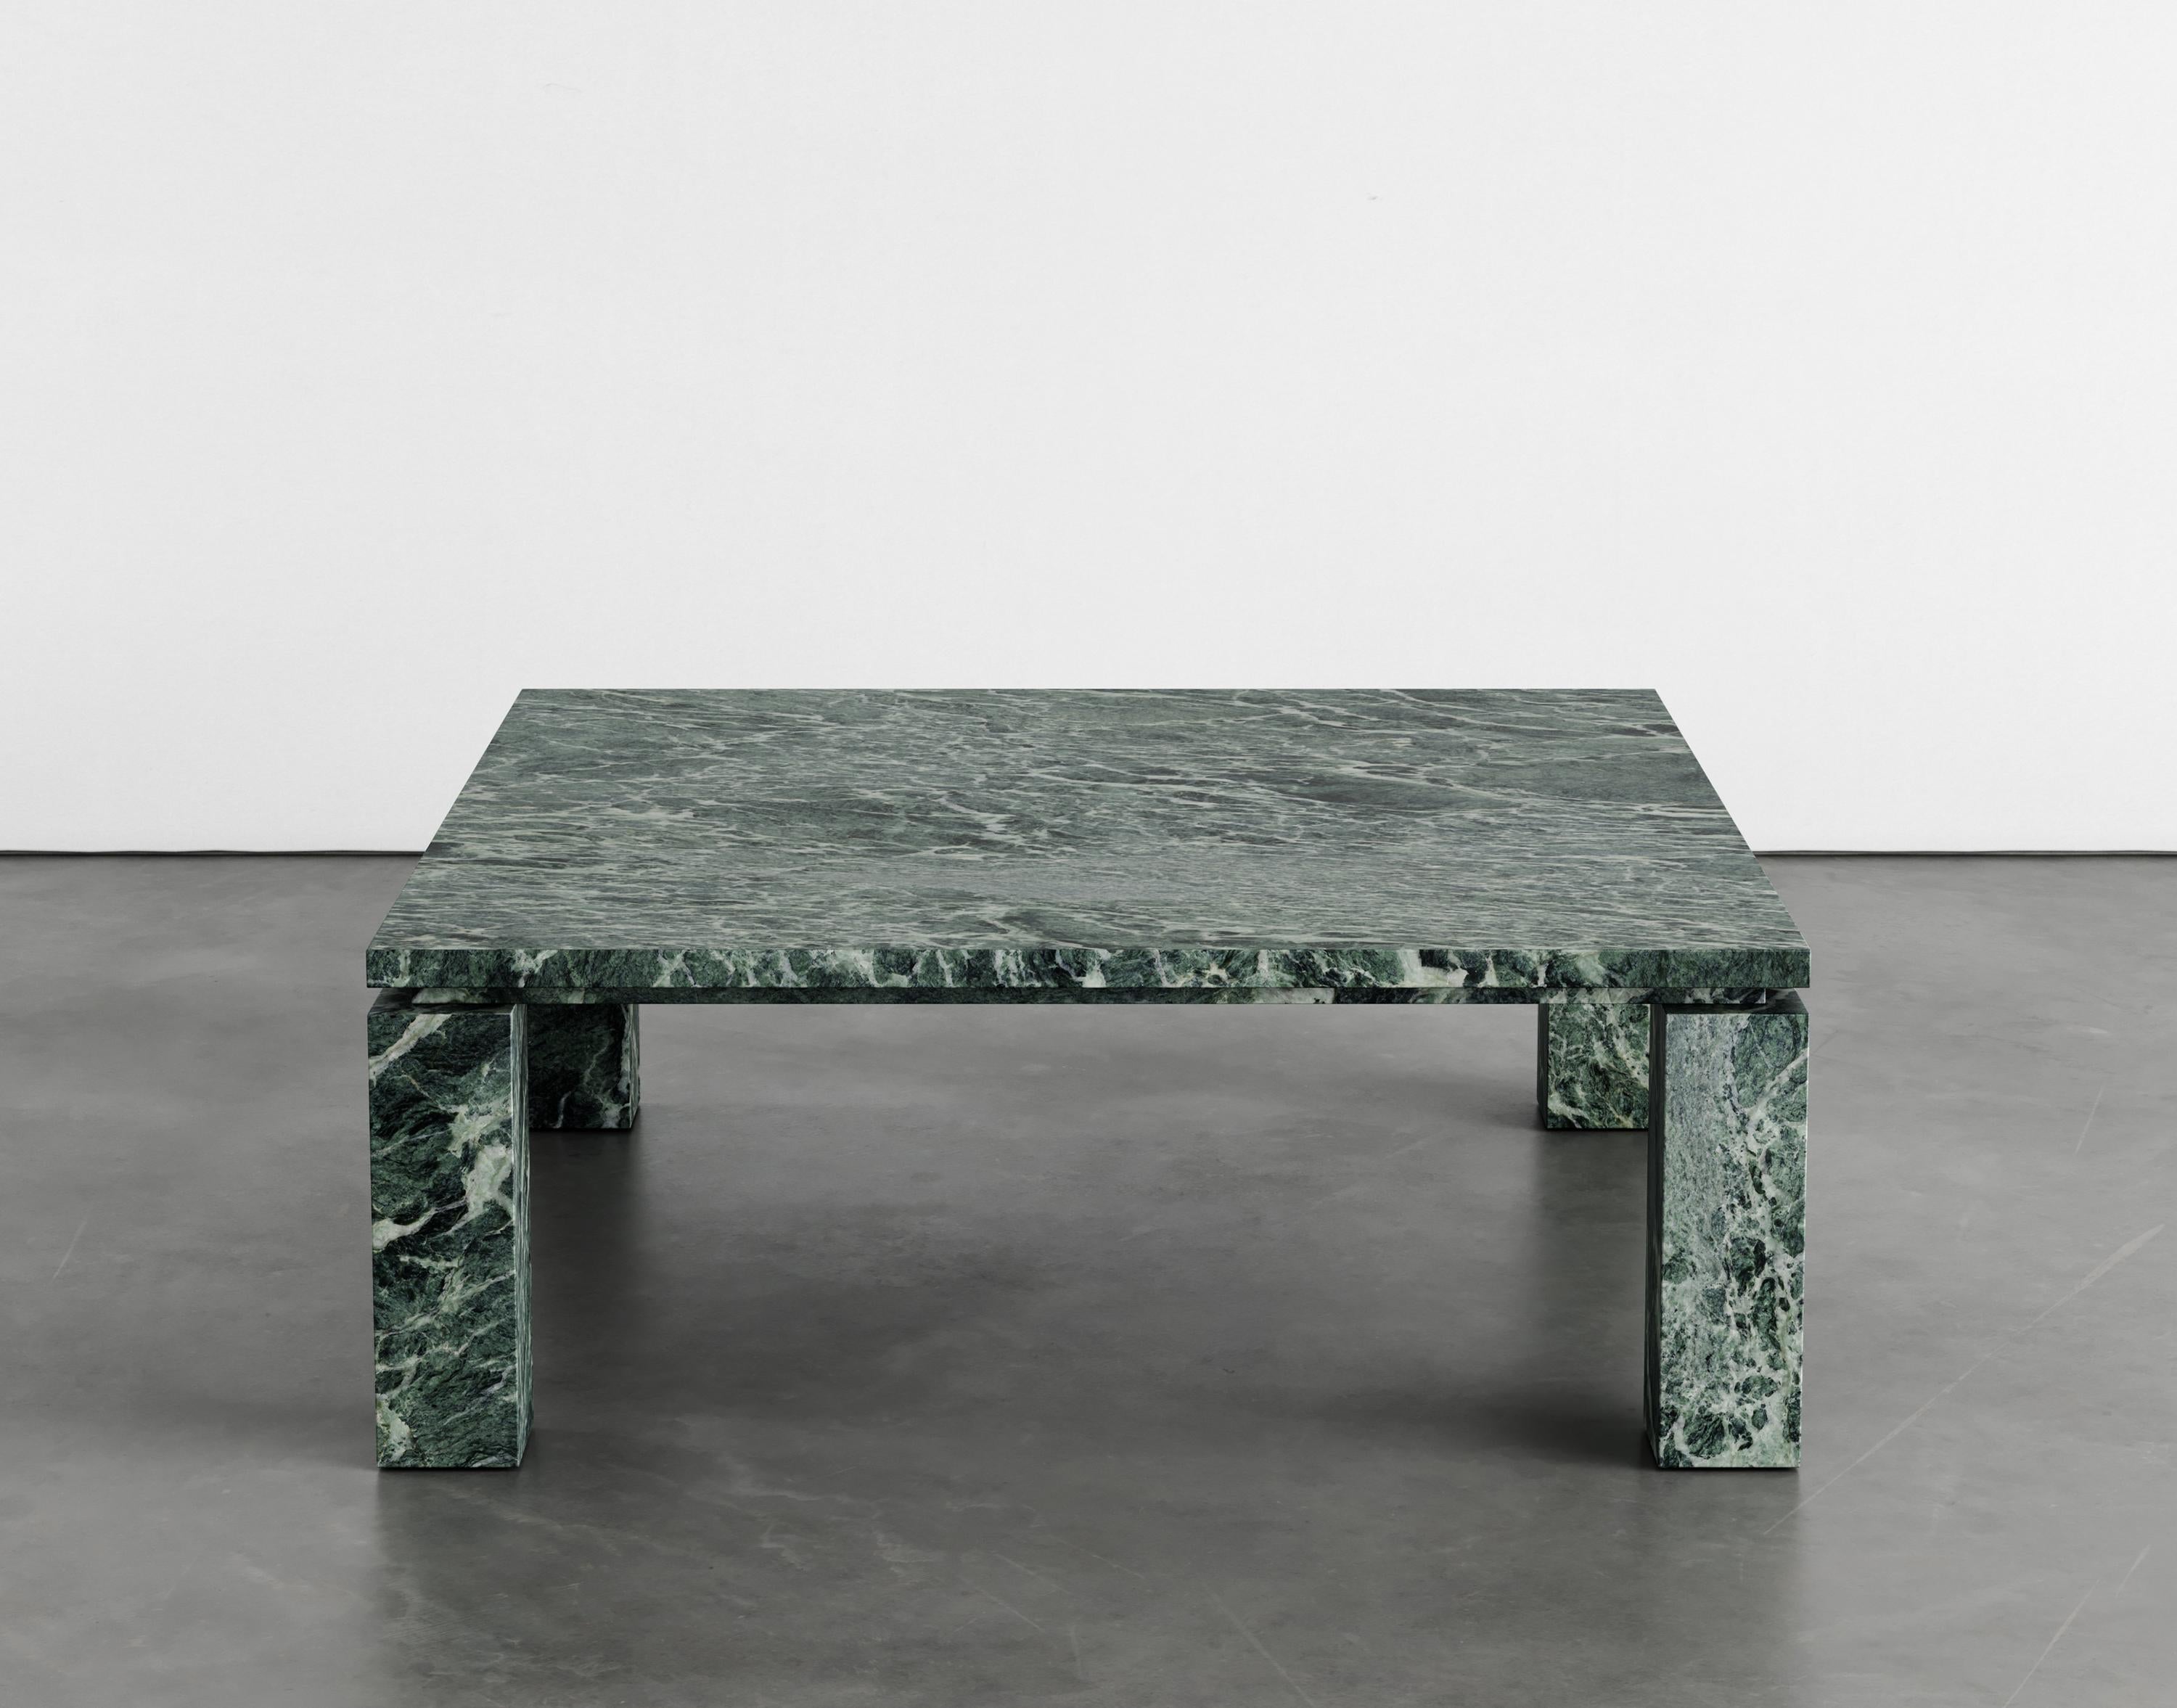 MarCo marble coffee table by Agglomerati
Dimensions: D 120 x W 120 x H 41 cm
Materials: Verde Alpi marble
Available in other stones.

MarCo Coffee Table is the centrepiece of the living space. The large proportions are favourable to host many